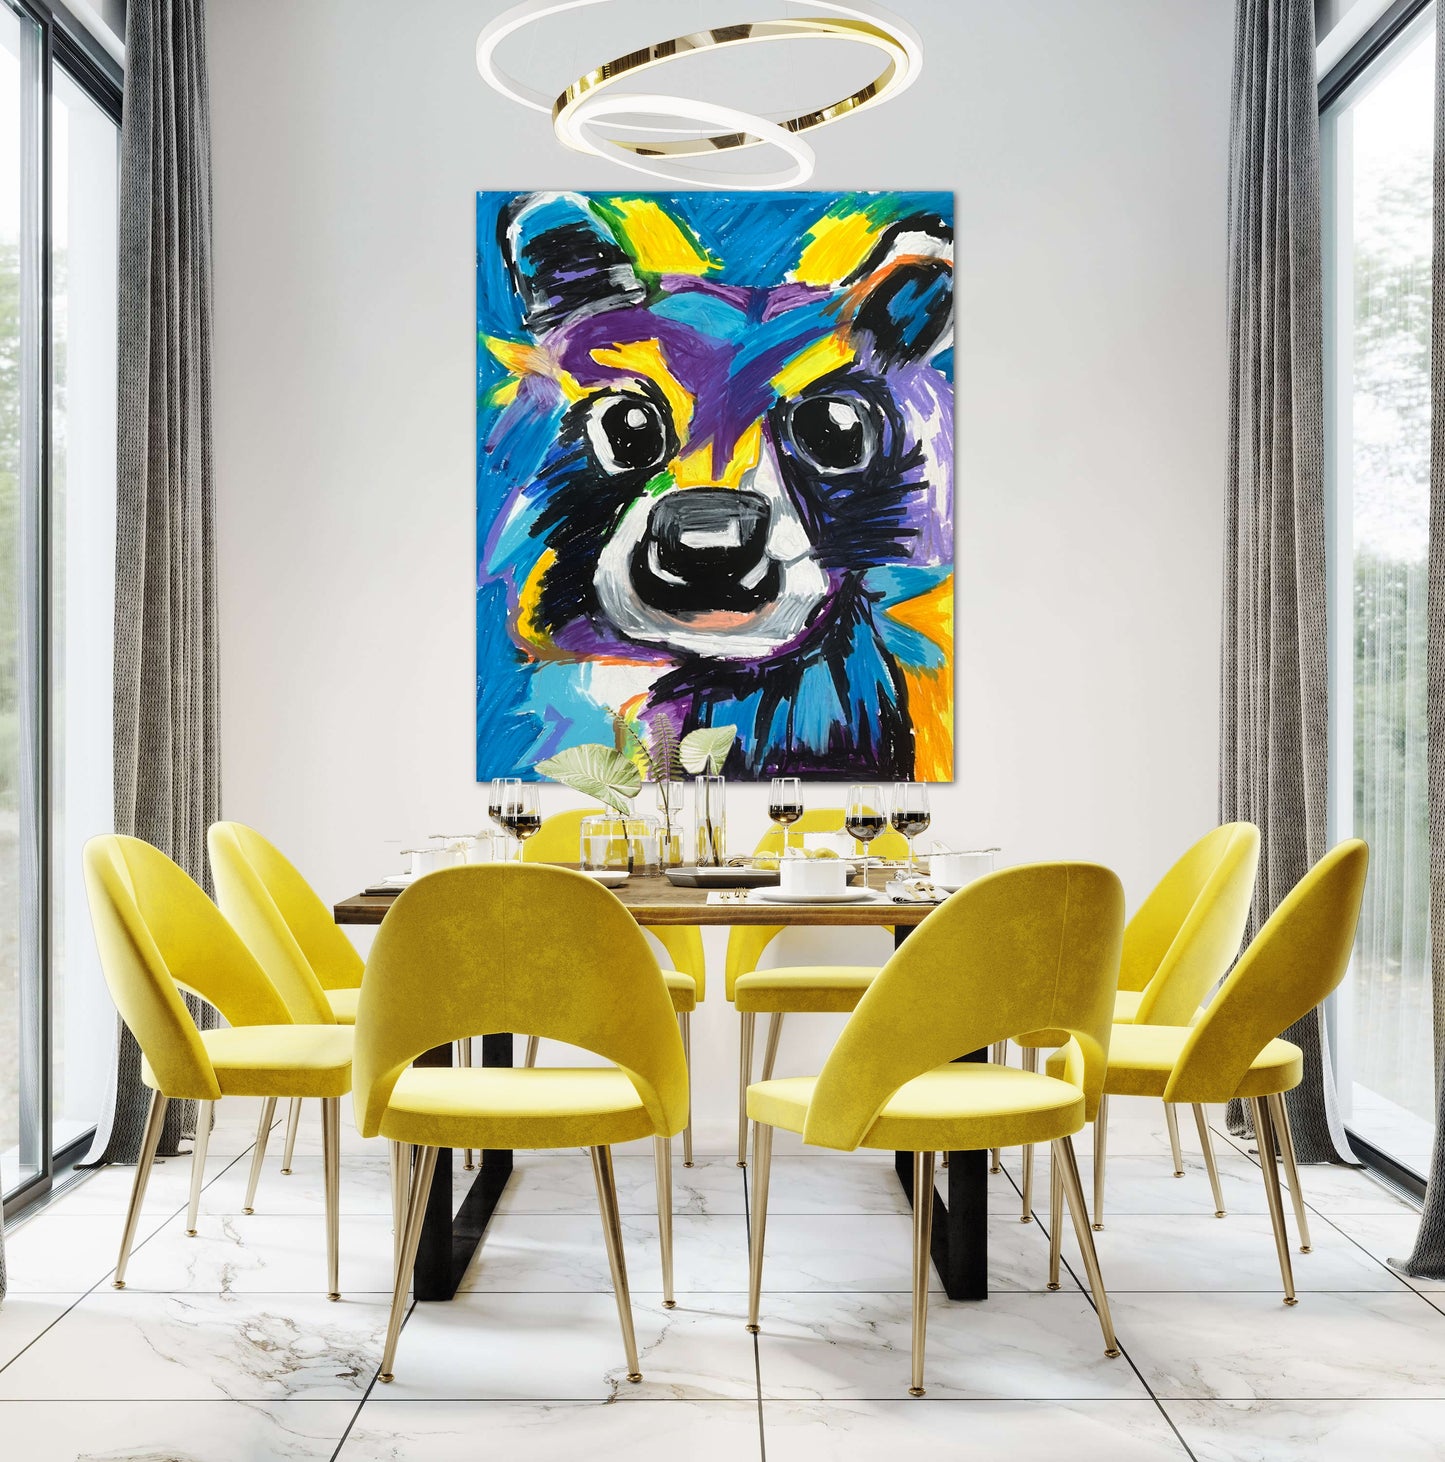 The Purple Panda - fine prints and canvas prints in more size